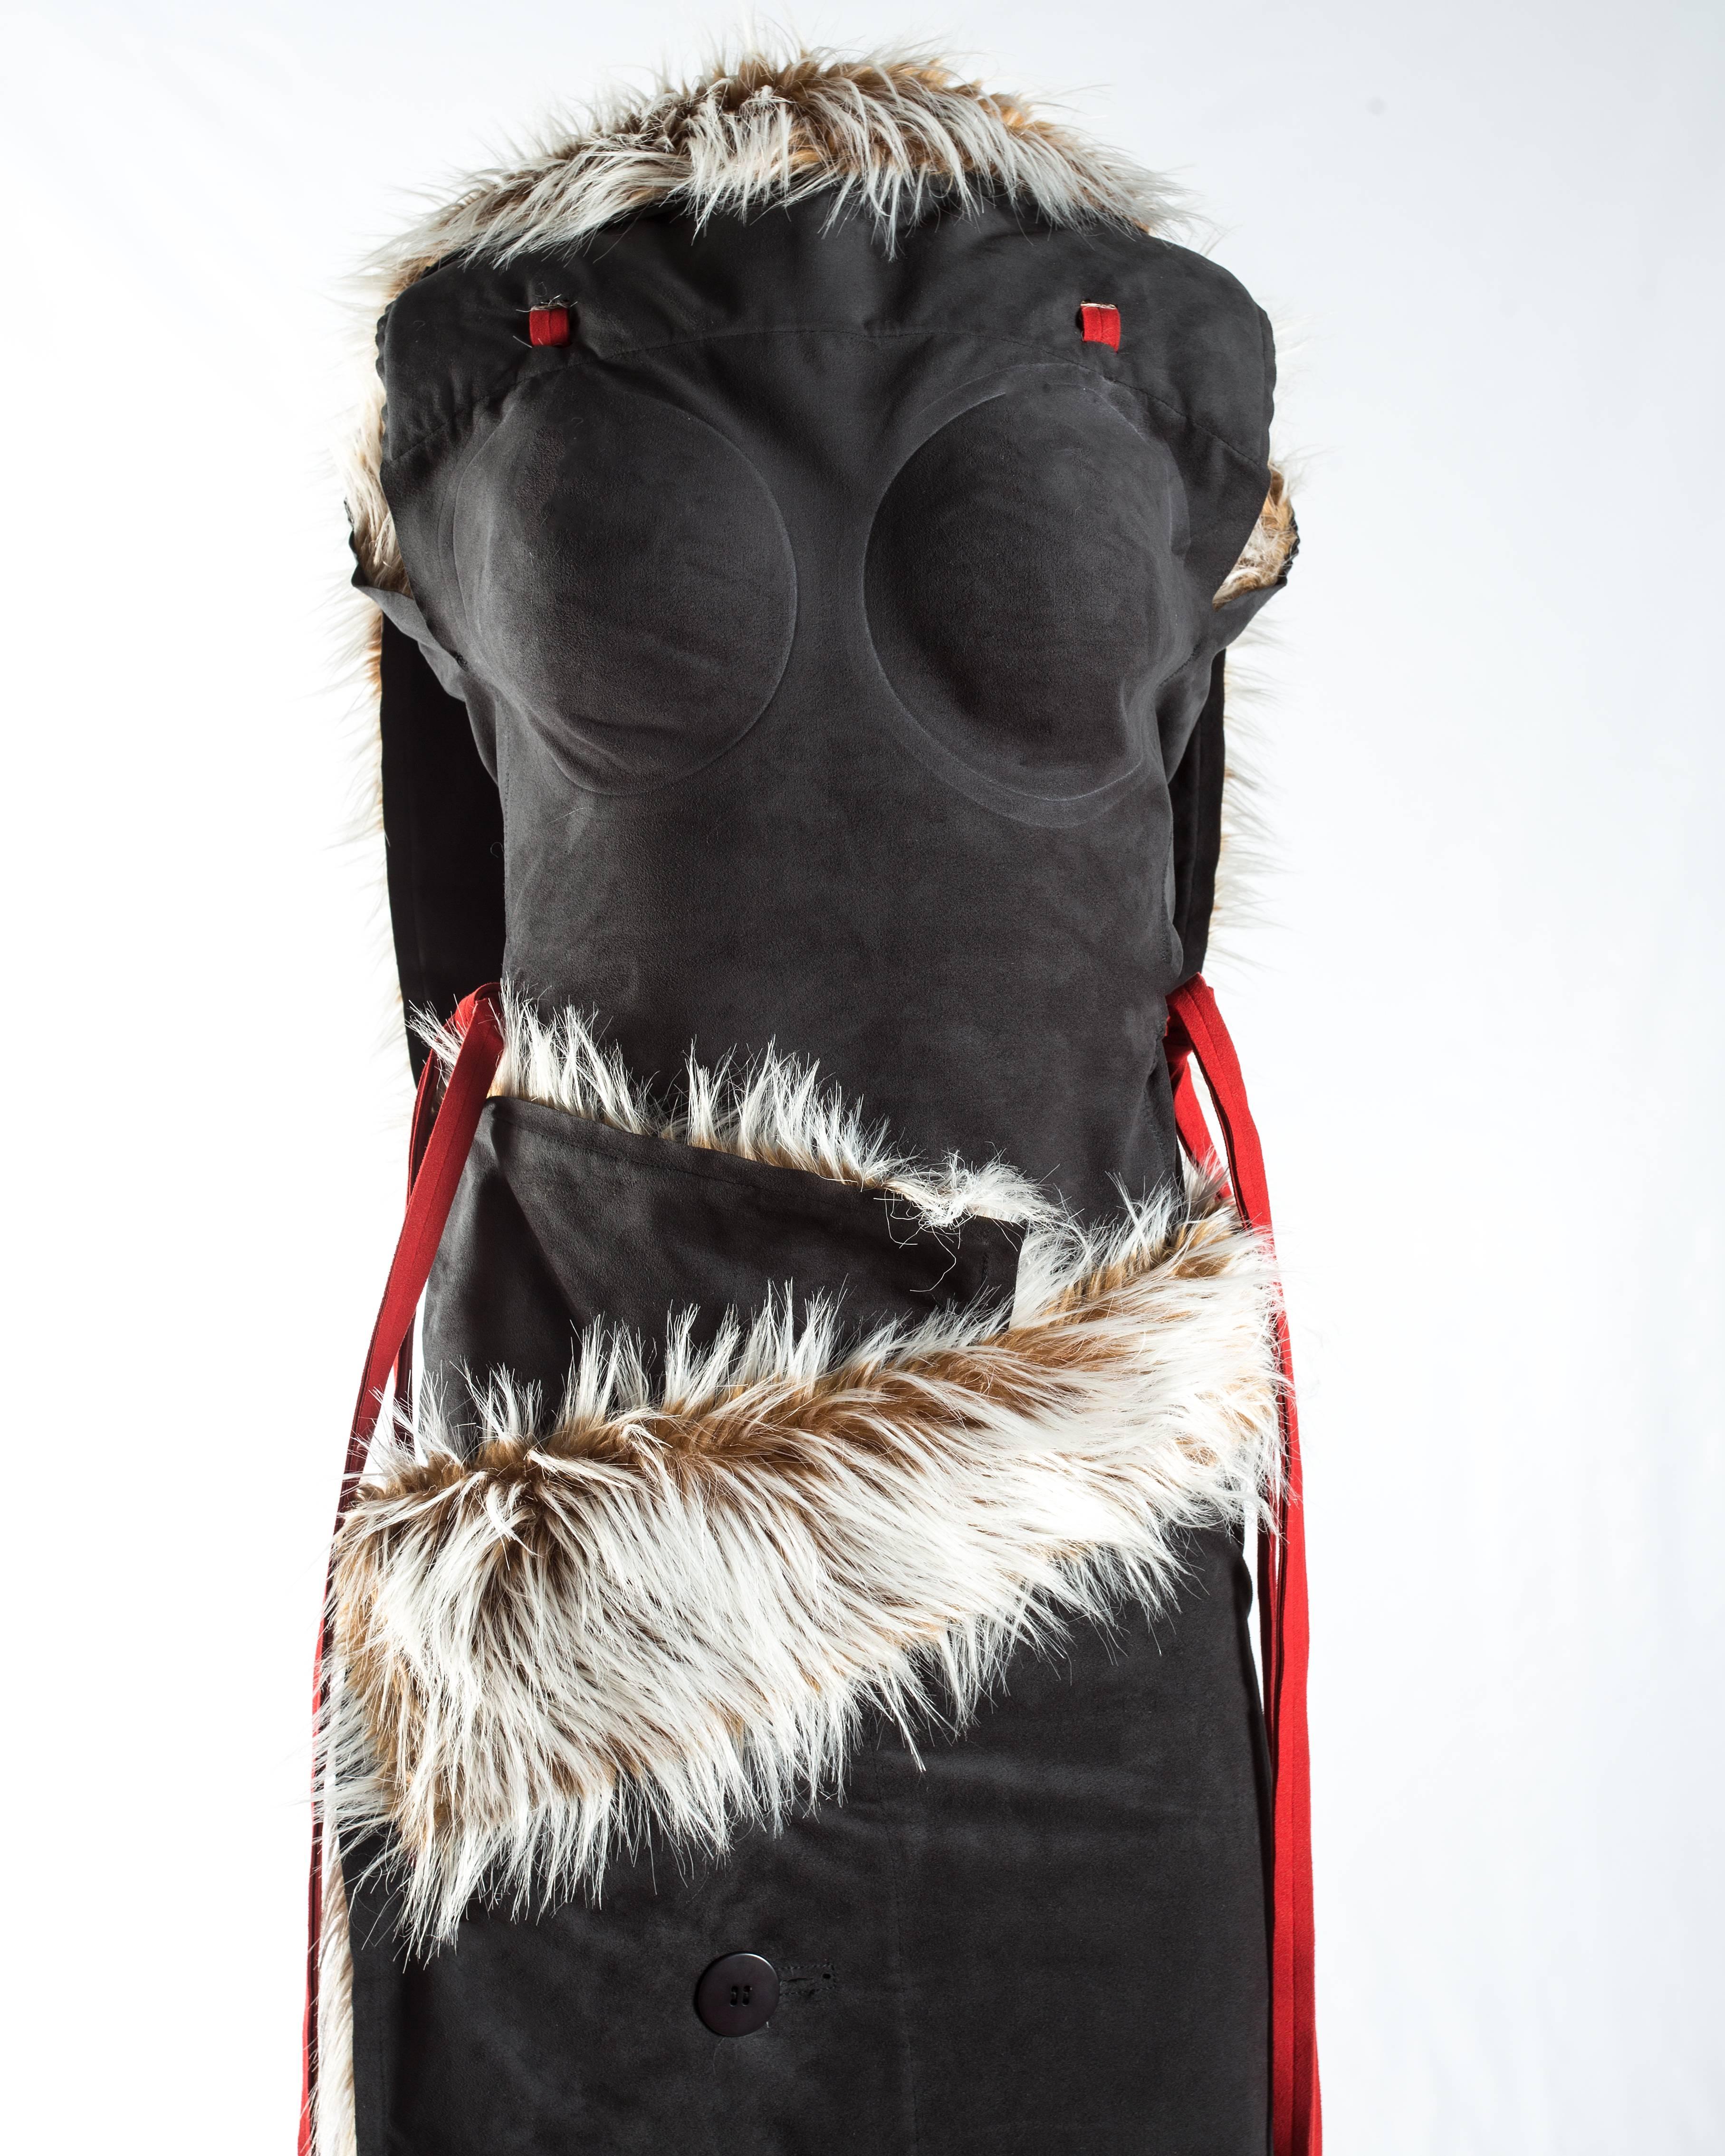 - Vest with emphasised breast panels and wrap design
- Blanket wrap skirt with button closures
- Faux fur / leatherette suede 

Autumn-Winter 2000